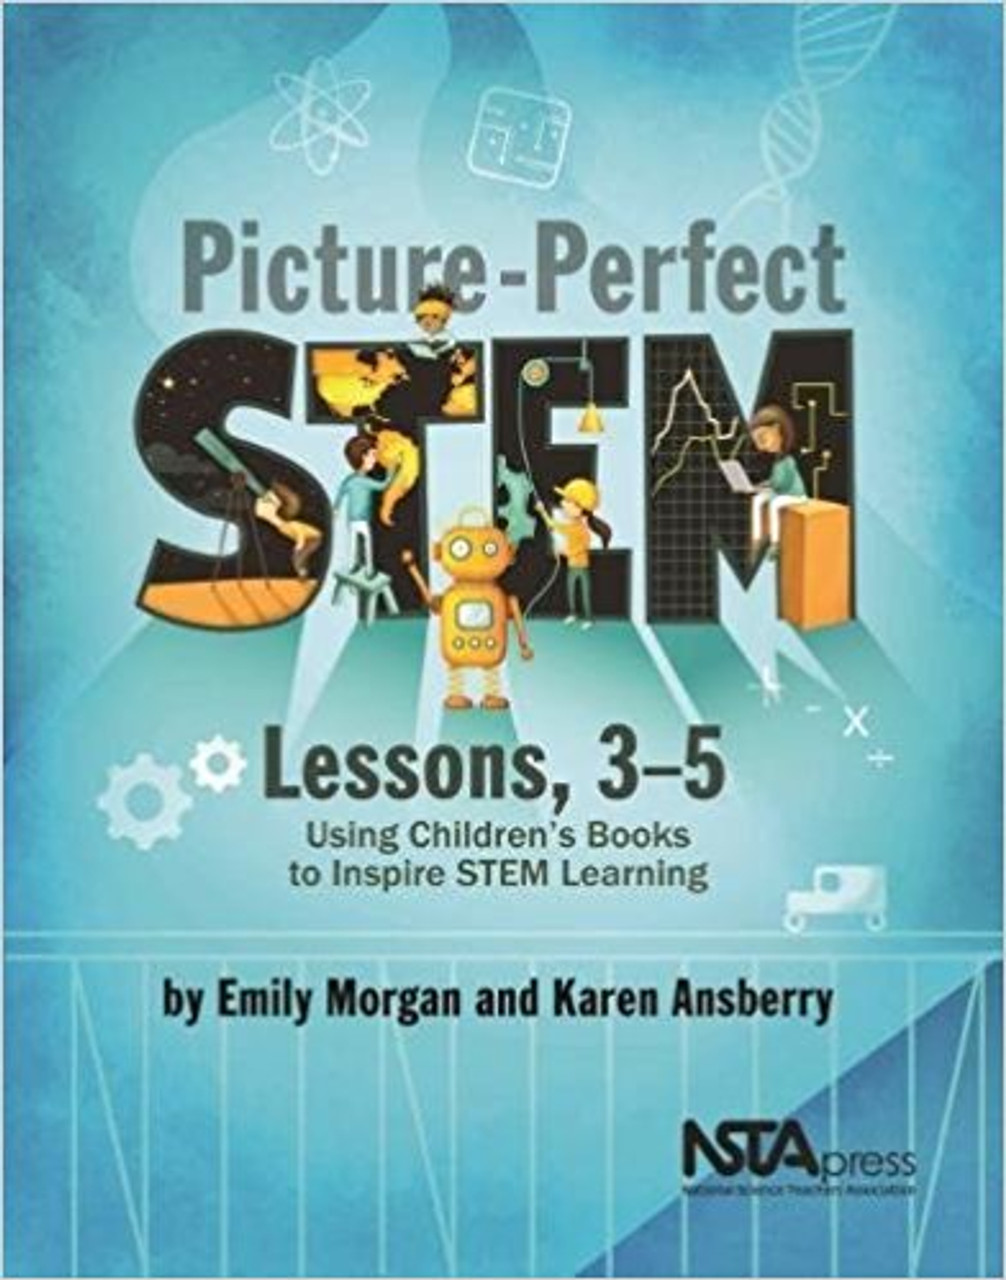 Picture-Perfect STEM Lessons, 3-5: Using Children's Books to Inspire STEM Learning by Emily Morgan